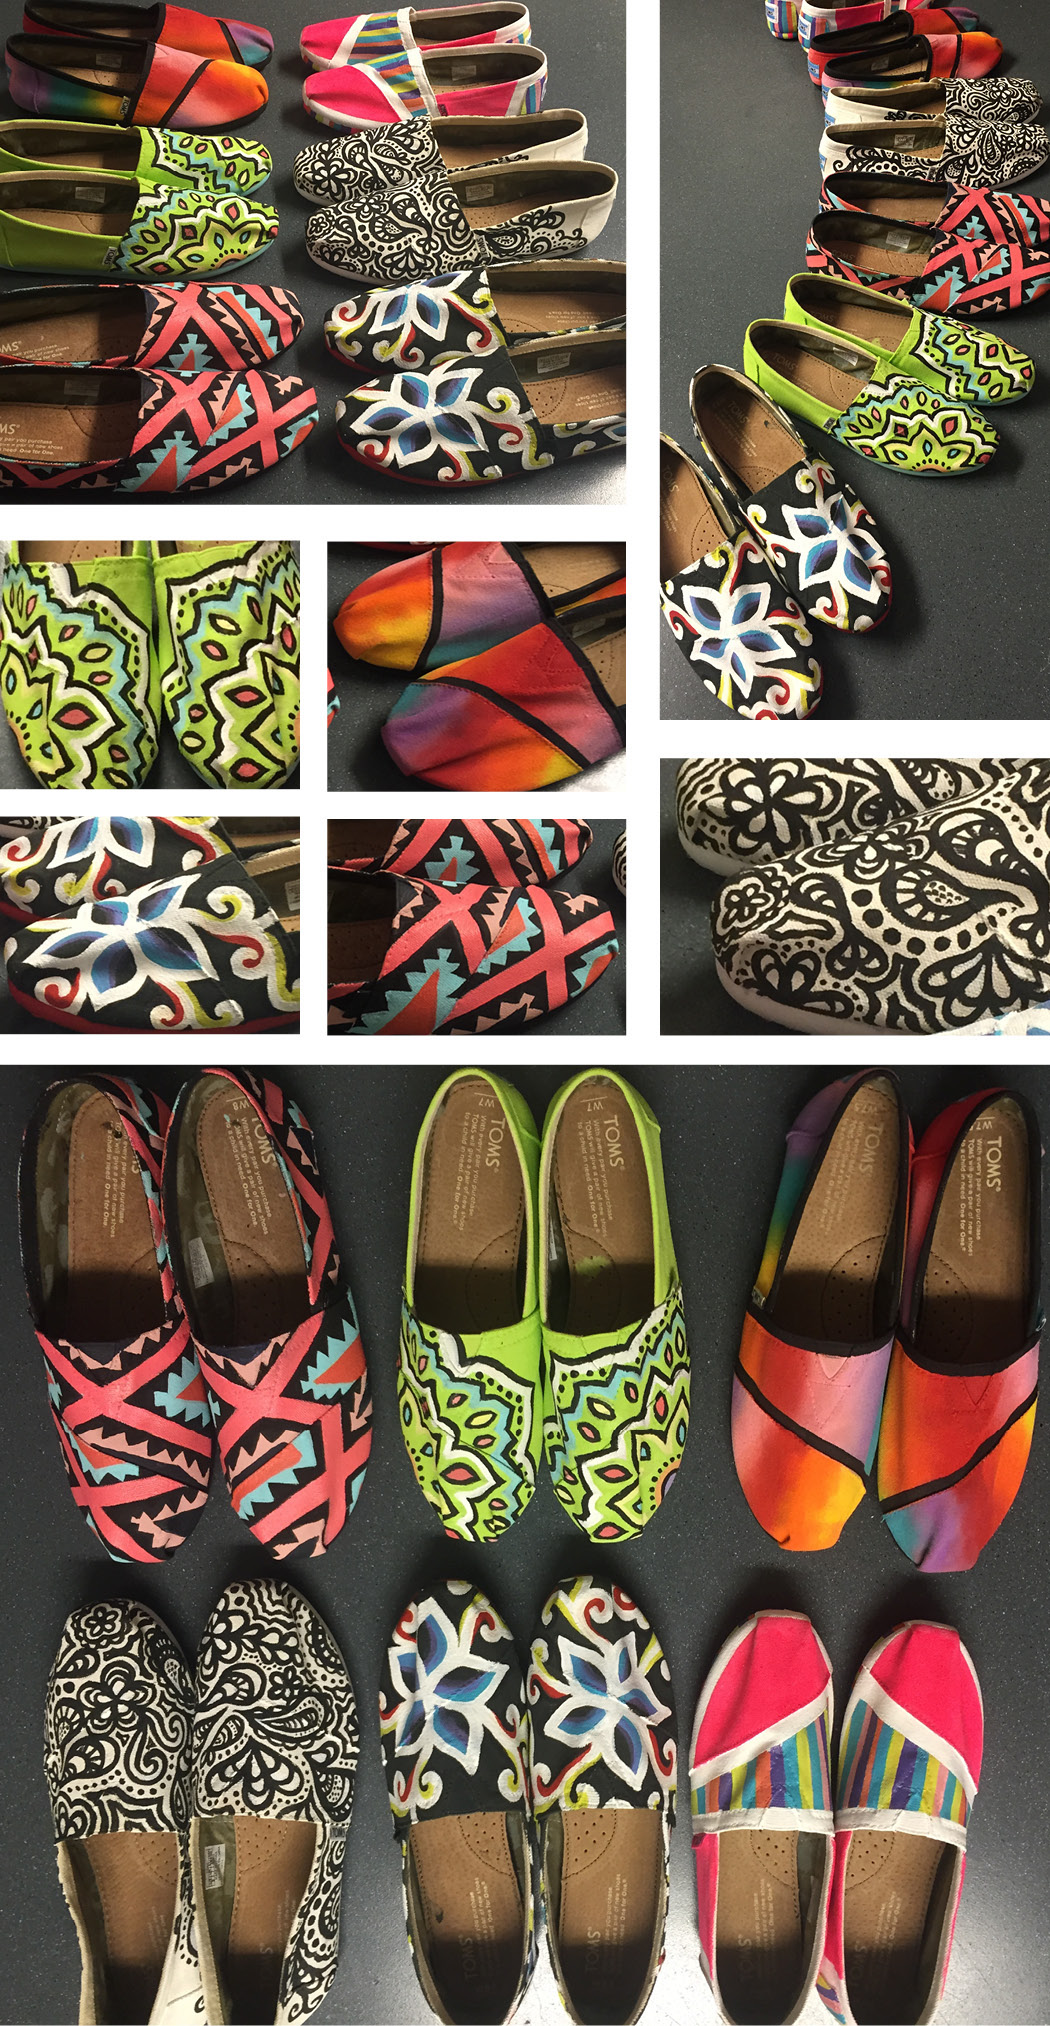 marcela Marcela Caraballo TOMS TOMS Shoes shoe shoe design shoe painting Painting Design colorful bright graphic Swirls Painted Toms painted shoes